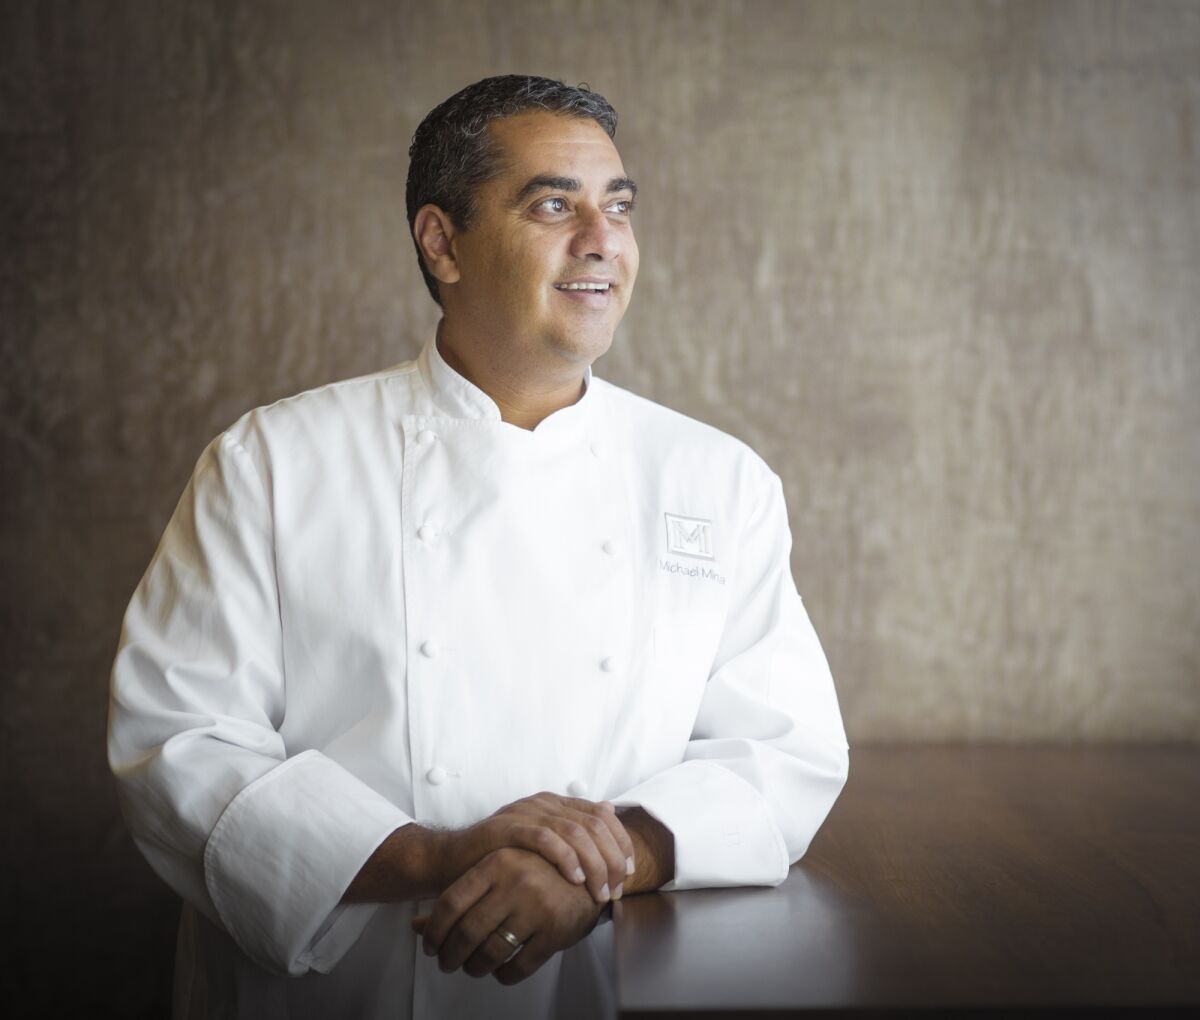 A smiling man in chef's whites leans on a counter.